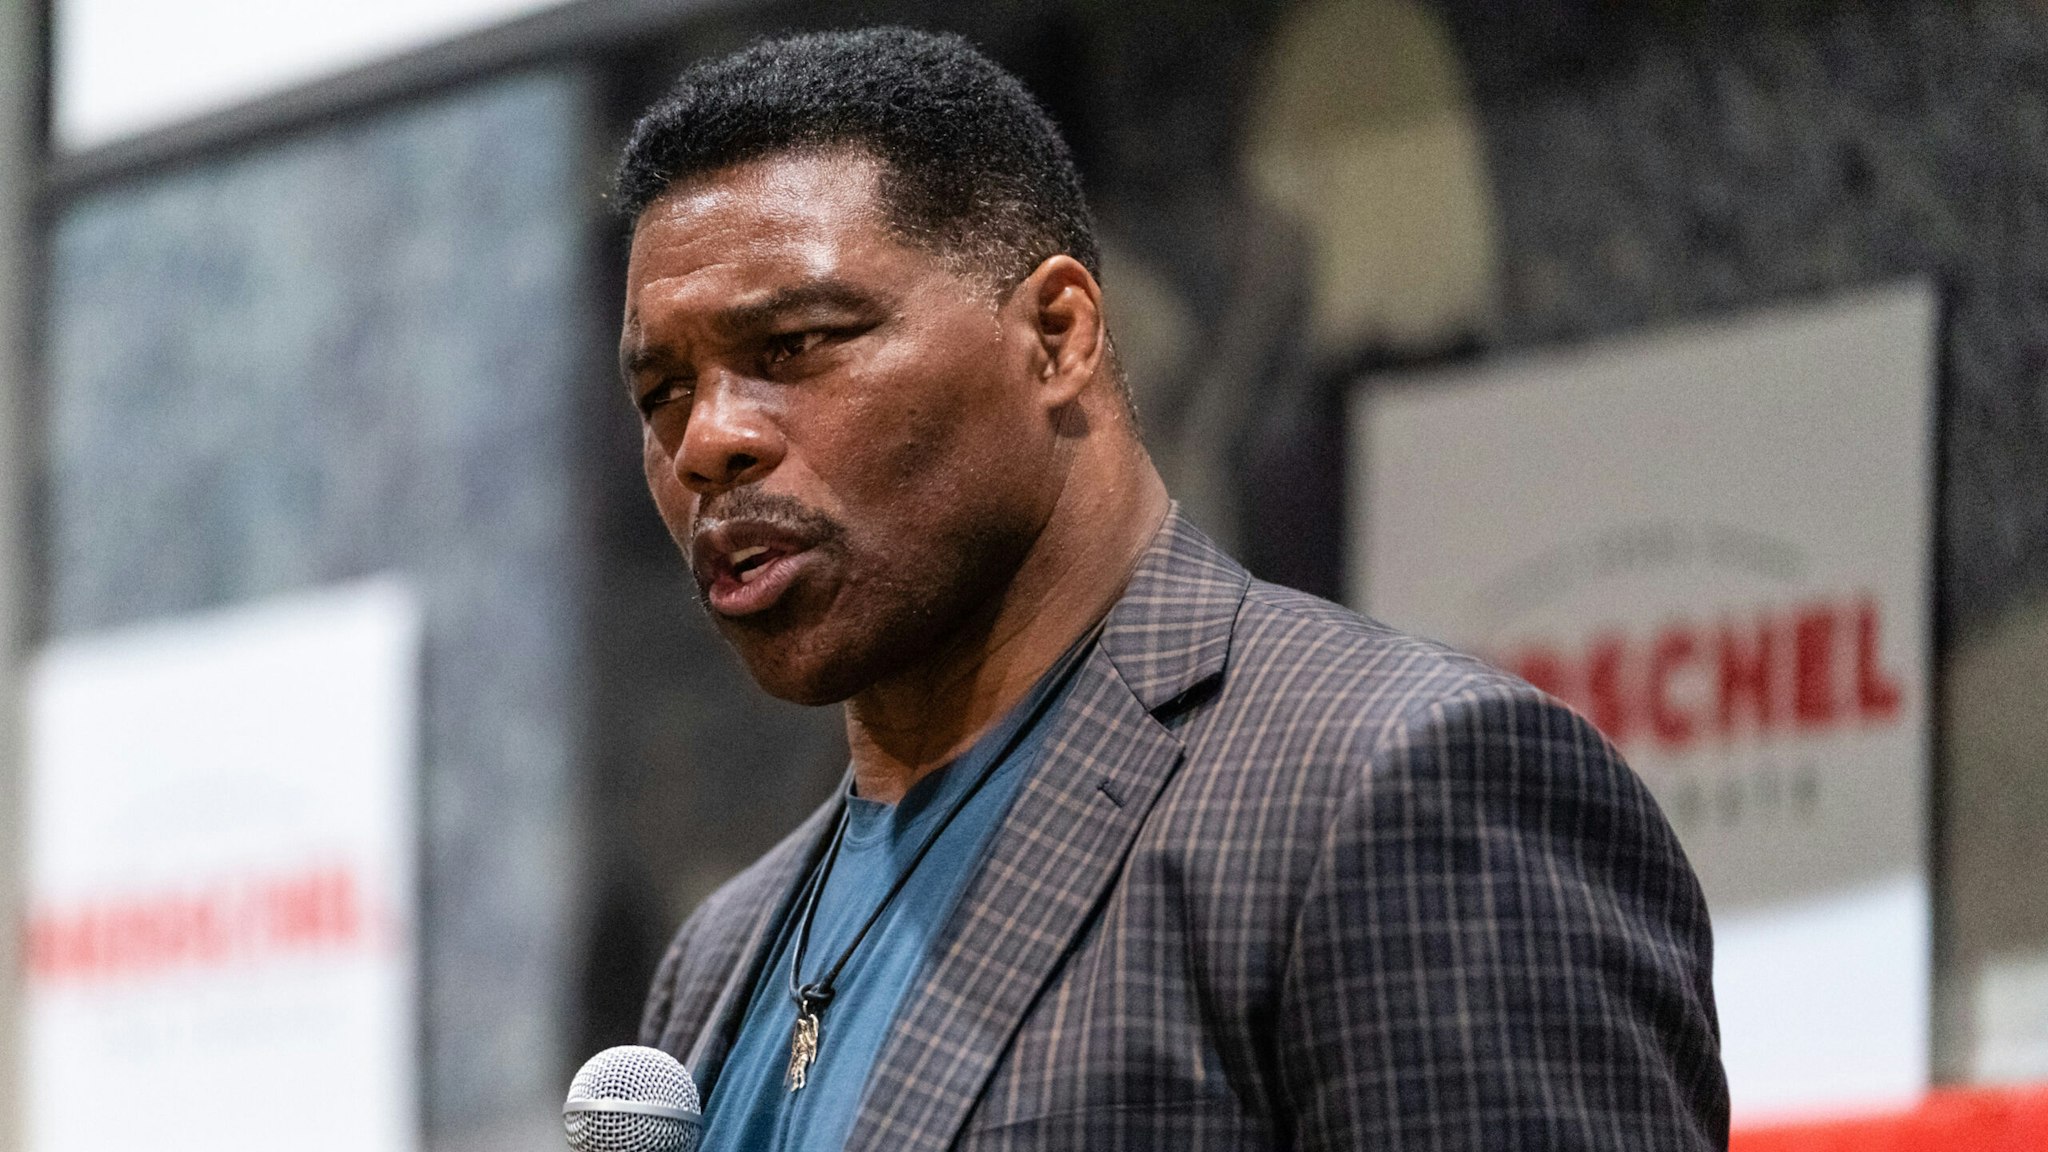 Herschel Walker, US Republican Senate candidate for Georgia, speaks during a campaign rally in Macon, Georgia, US, on Wednesday, May 18, 2022.